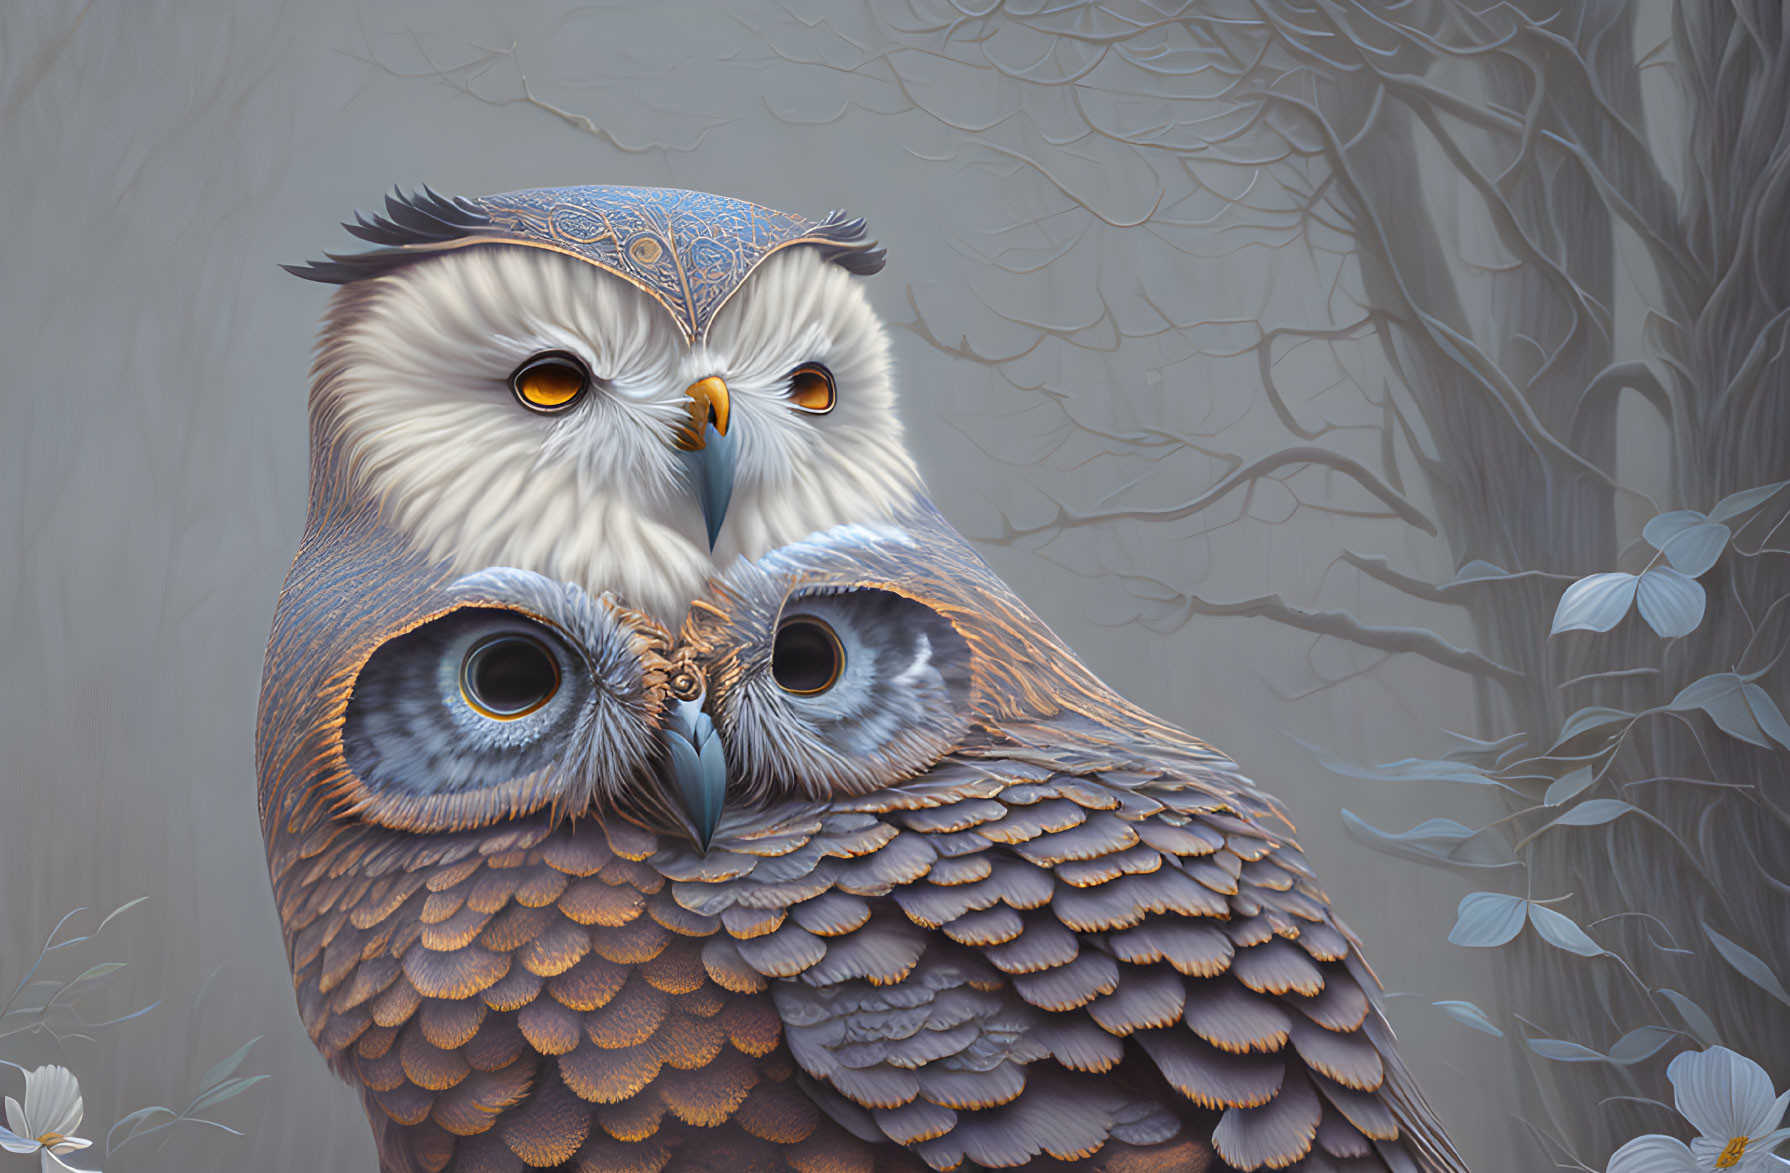 Intricate Owl Illustration with Yellow Eyes in Misty Forest